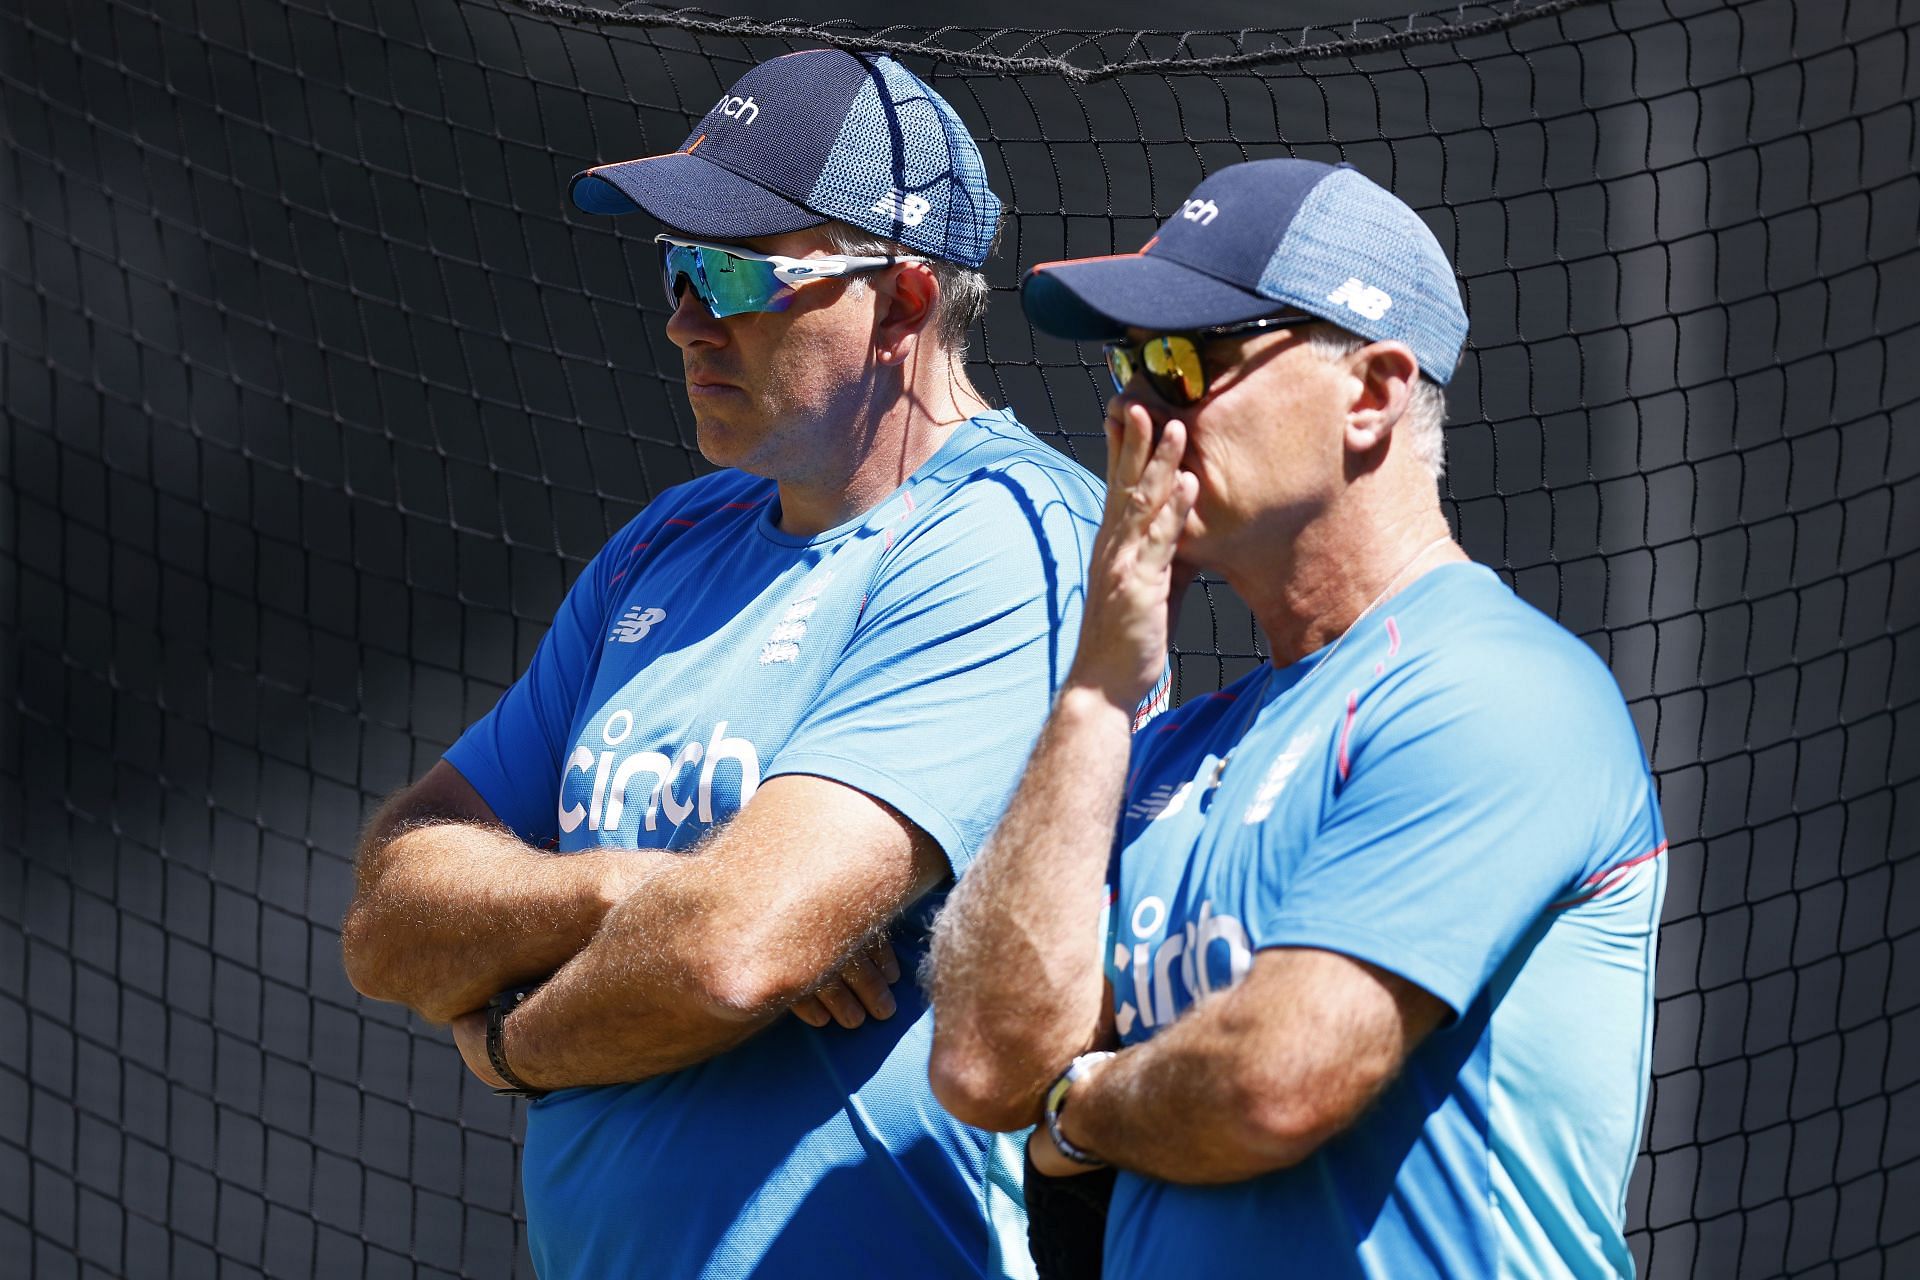 The Ashes 2021/22: Graham Thorpe to oversee England's early preparations in  Chris Silverwood's absence, Cricket News